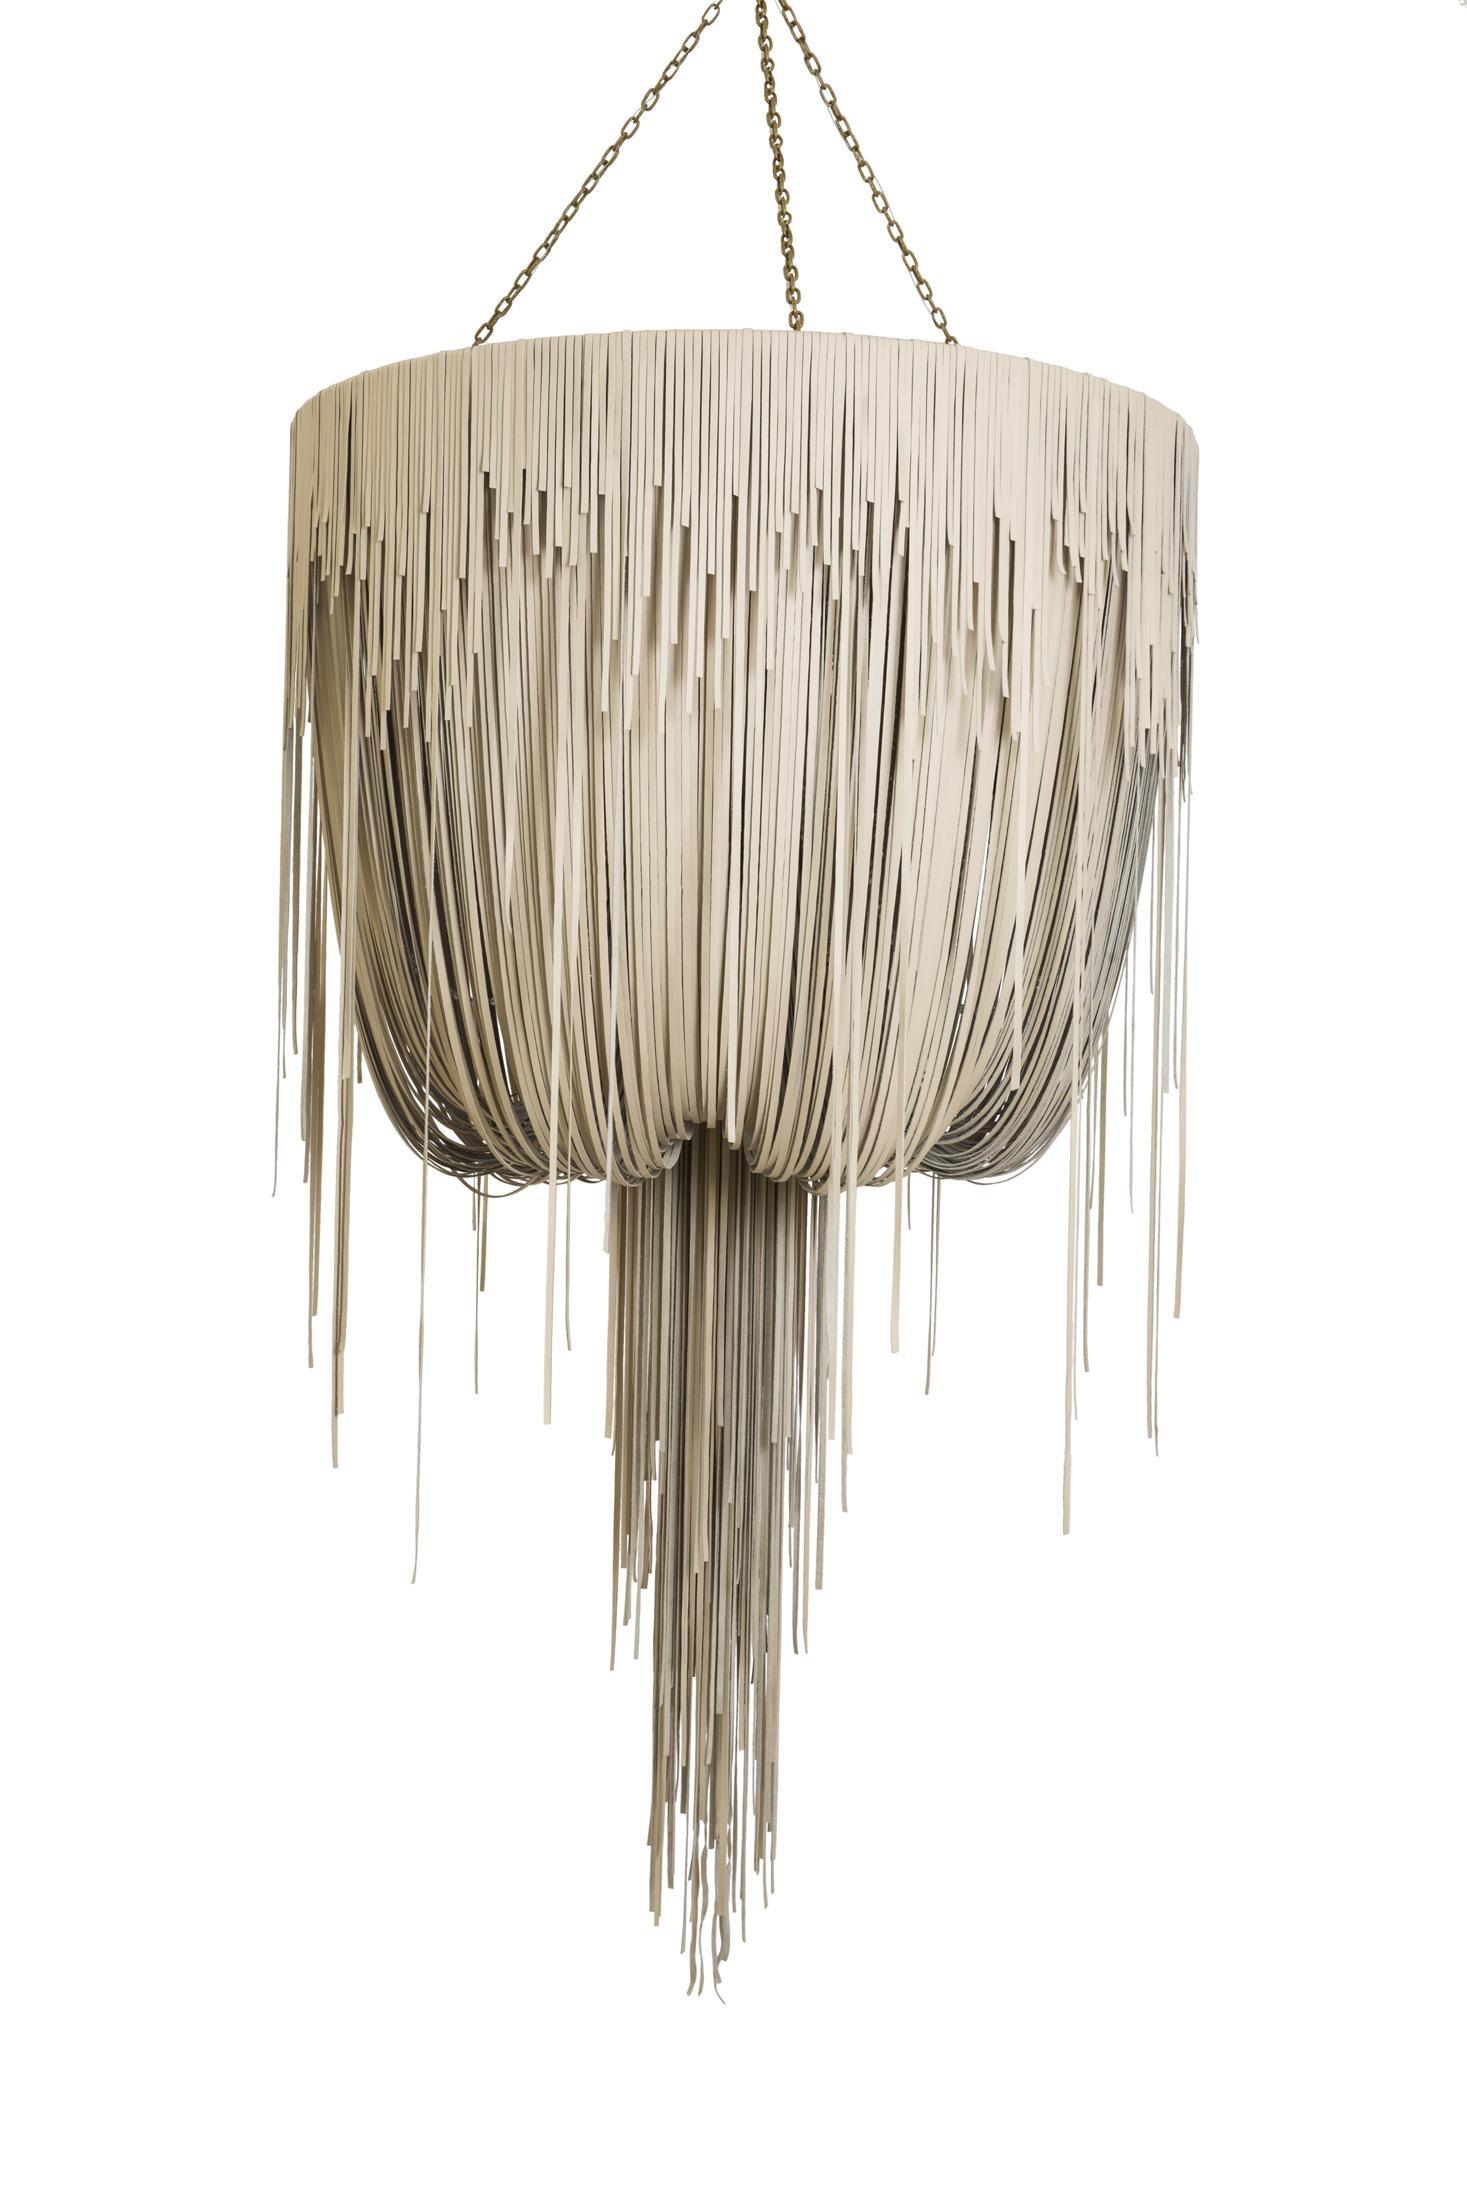 Large Round Urchin Leather Chandelier in Cream-Stone Leather